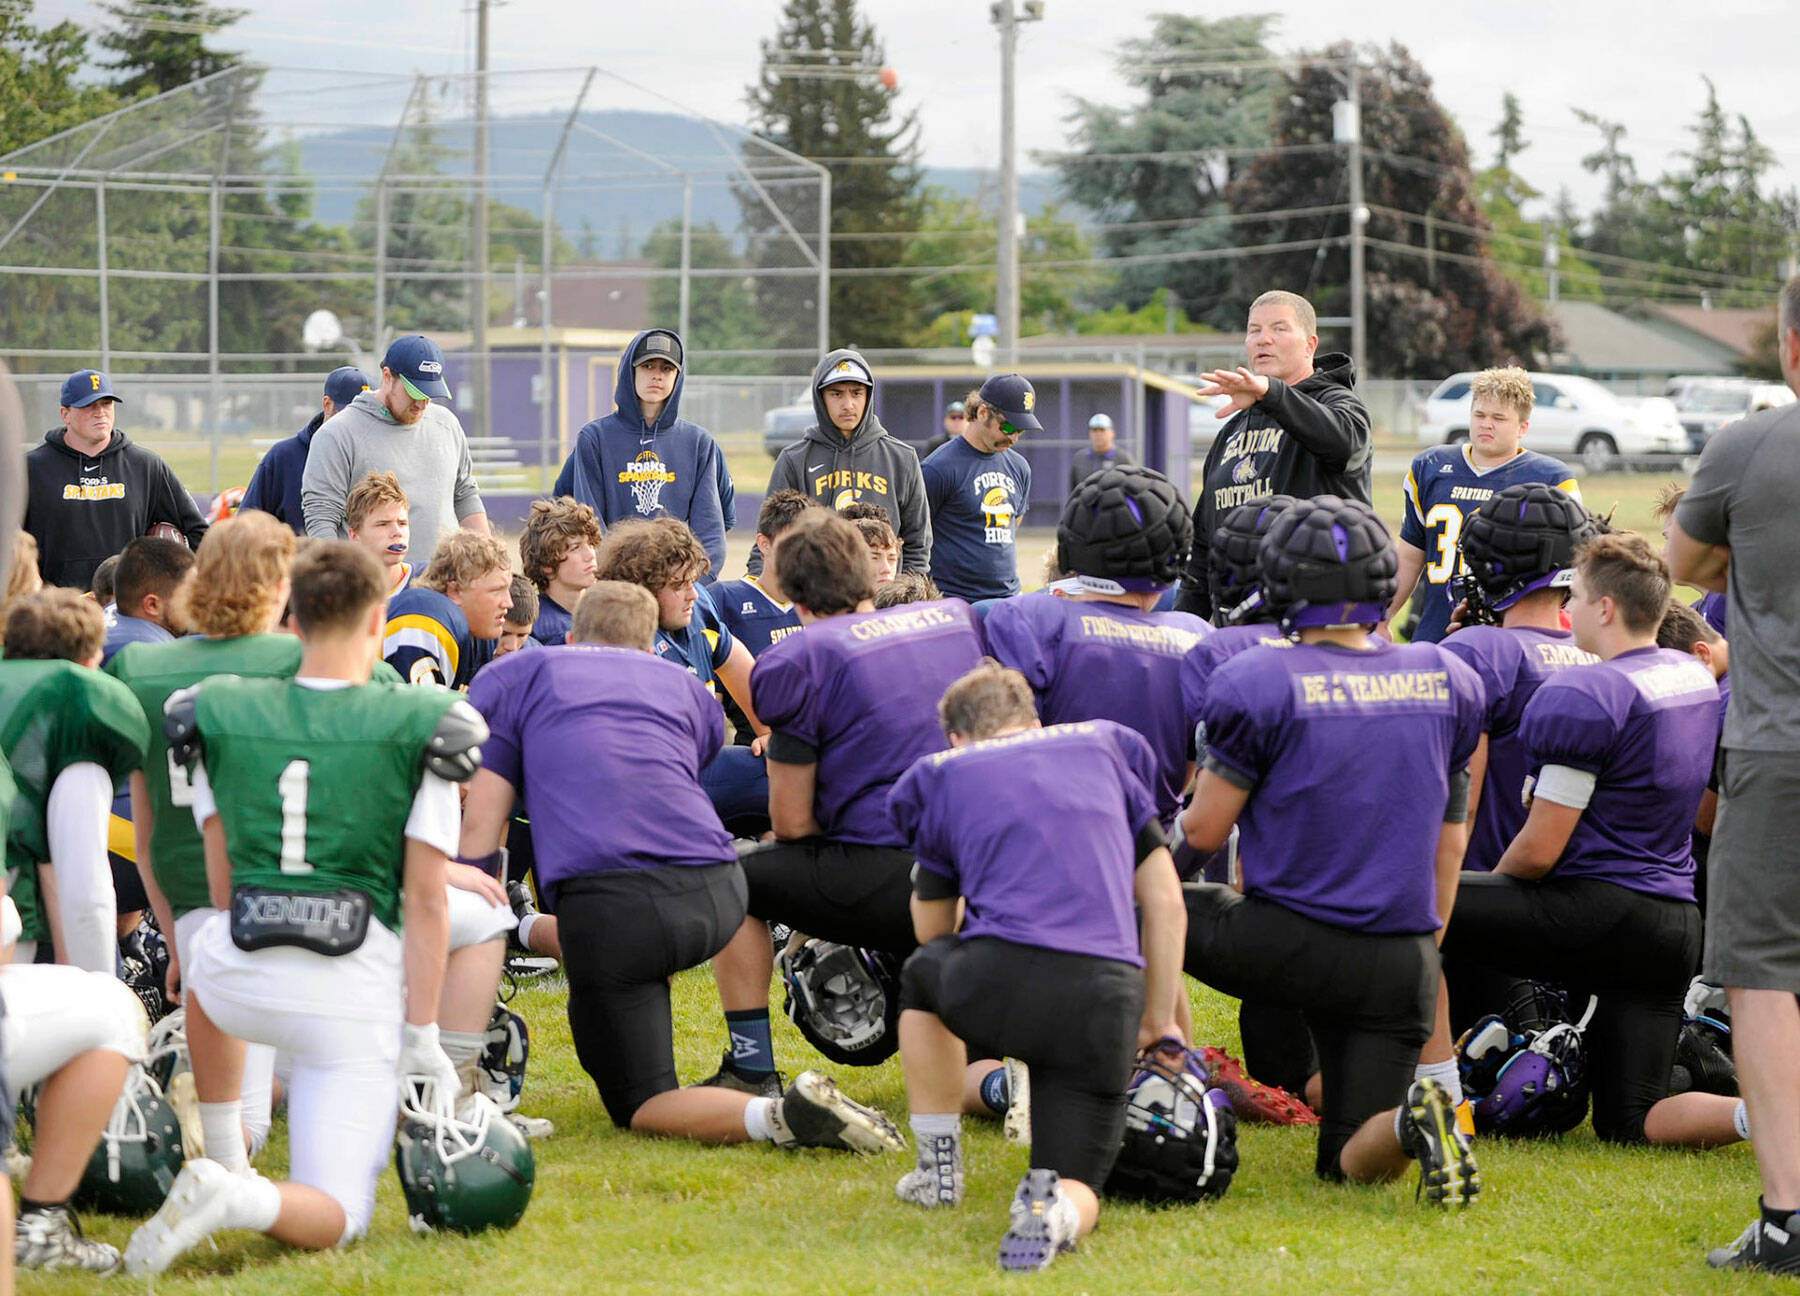 Sequim football coach Erik Wiker speaks to Sequim, Port Angeles and Forks players at a three-team scrimmage in 2018. Sequim players can be seen wearing Guardian Caps on their helmets. (Michael Dashiell/Olympic Peninsula News Group)